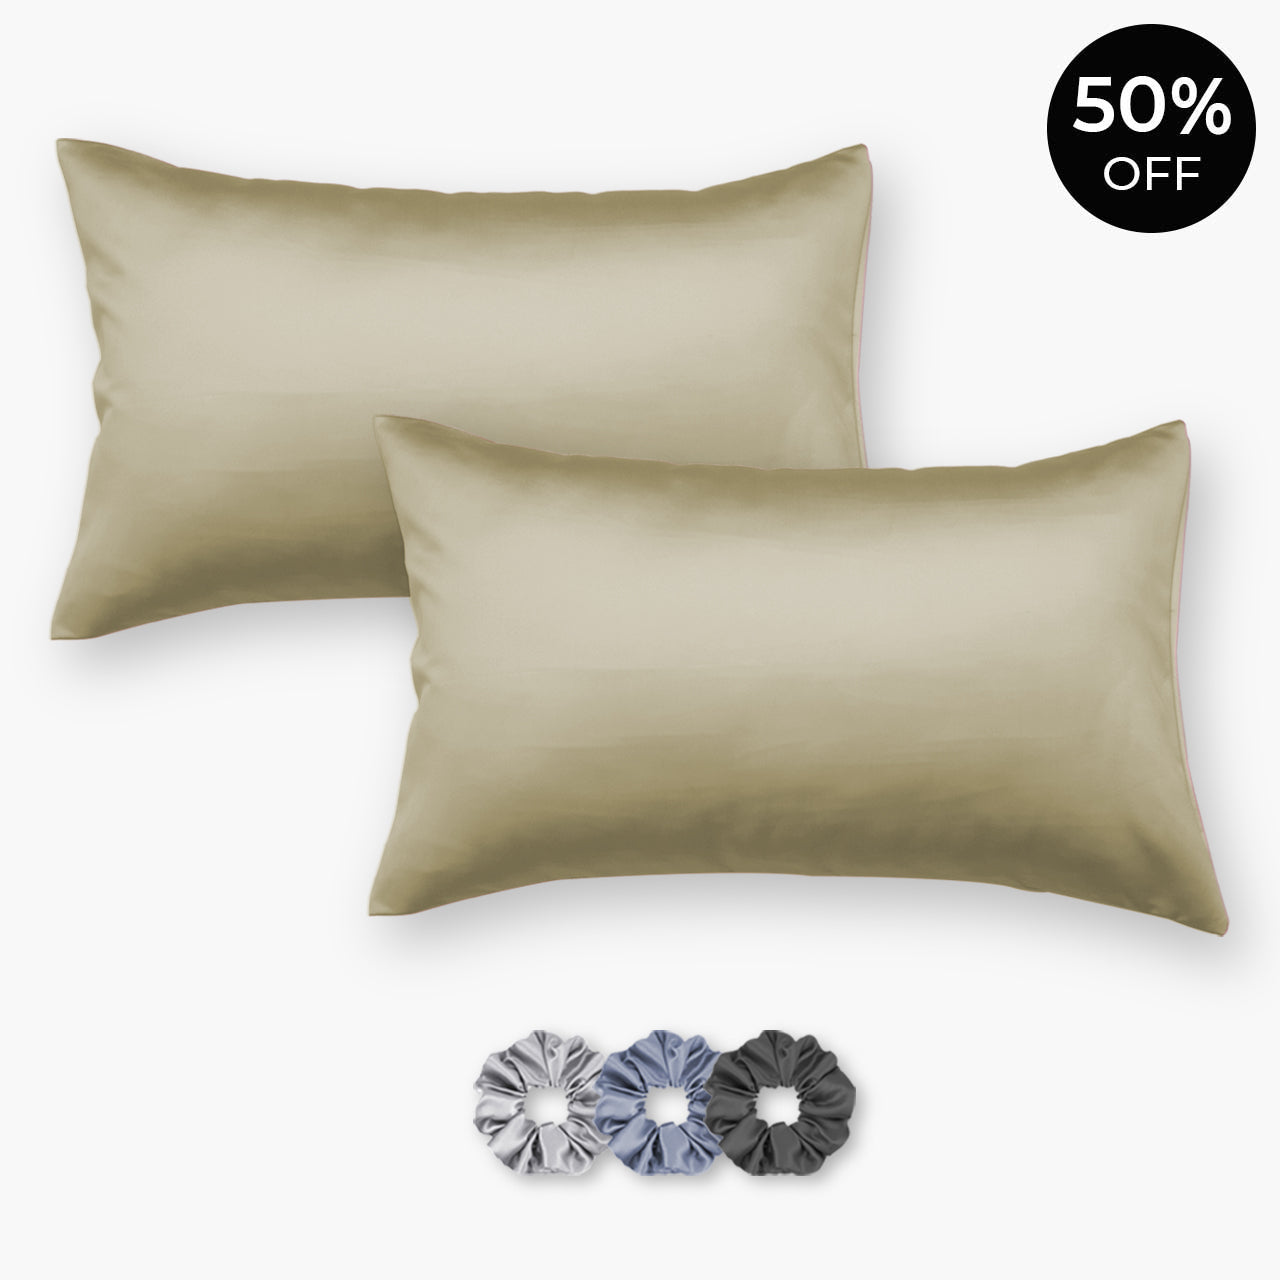 Champagne Satin Pillowcases - Set of 2 (With 3 free scrunchies)